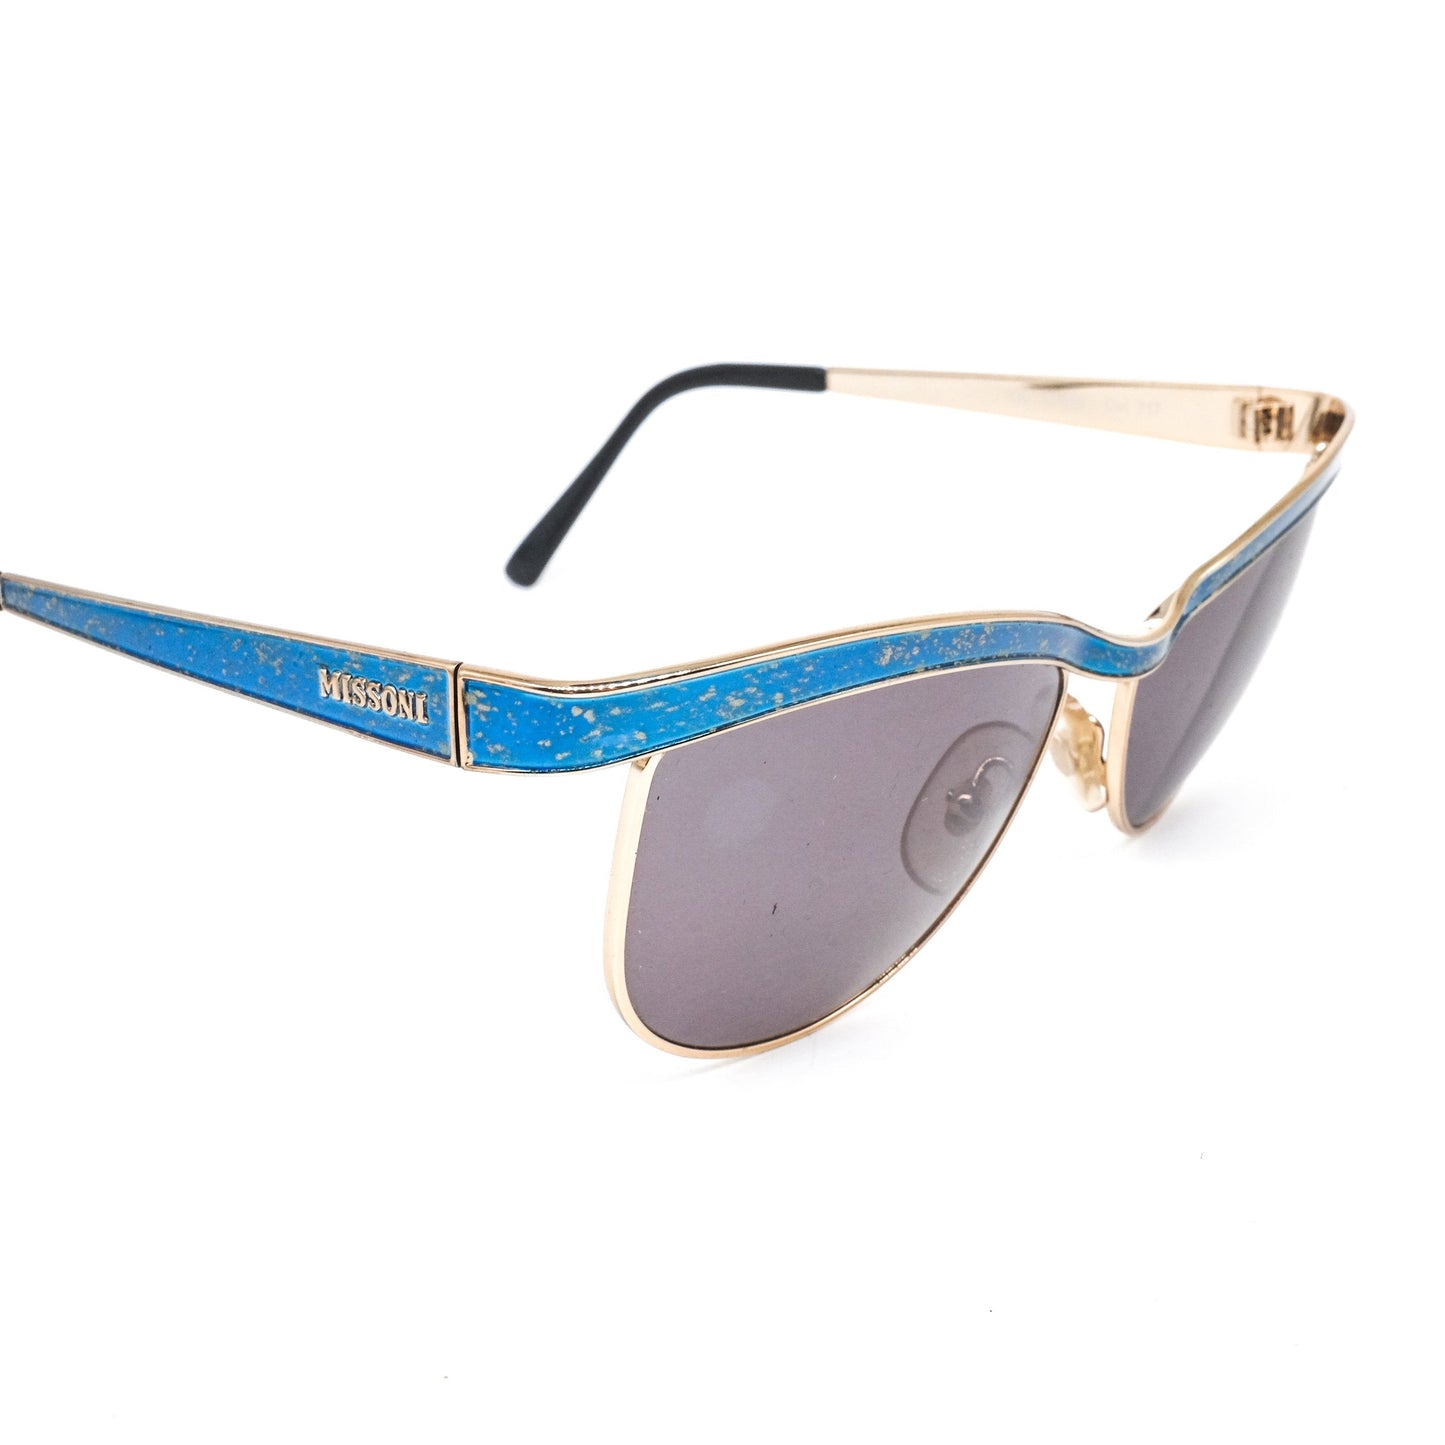 Missoni metallic cateye sunglasses with thick blue browline crafted in satin gold. 90s NOS Italy